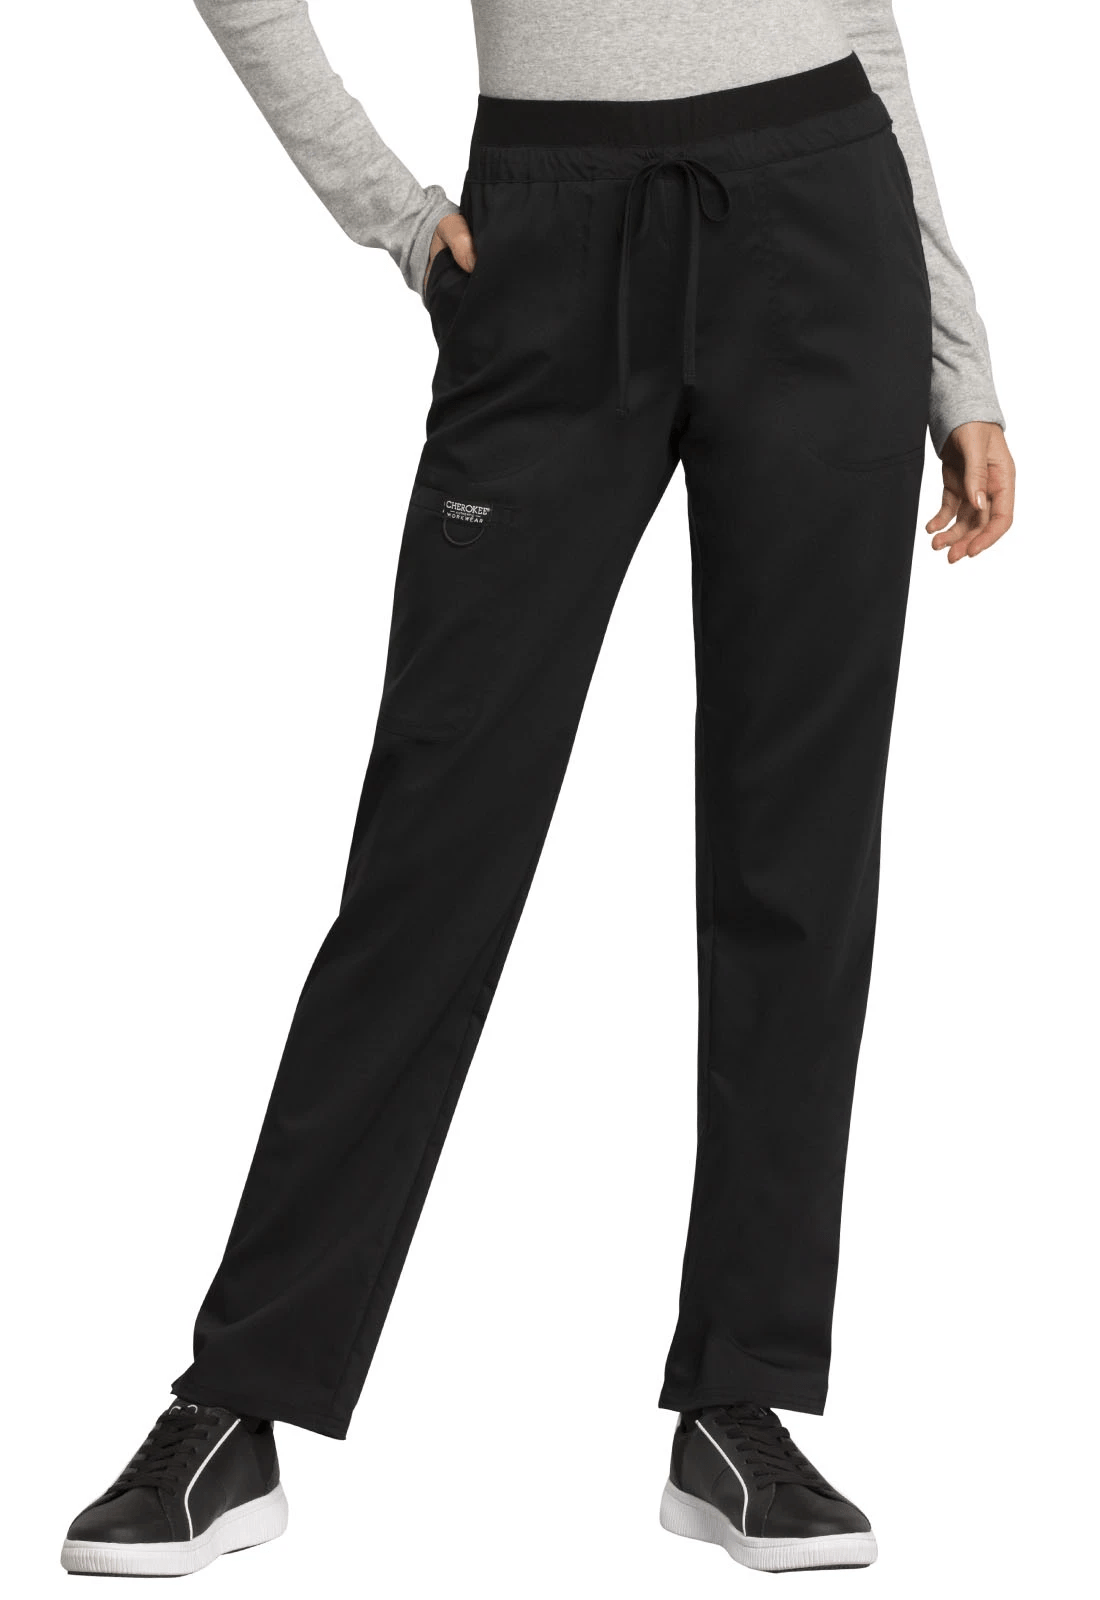 WW120P Petite Workwear Revolution Moderate Flare 5 Pocket Pant by